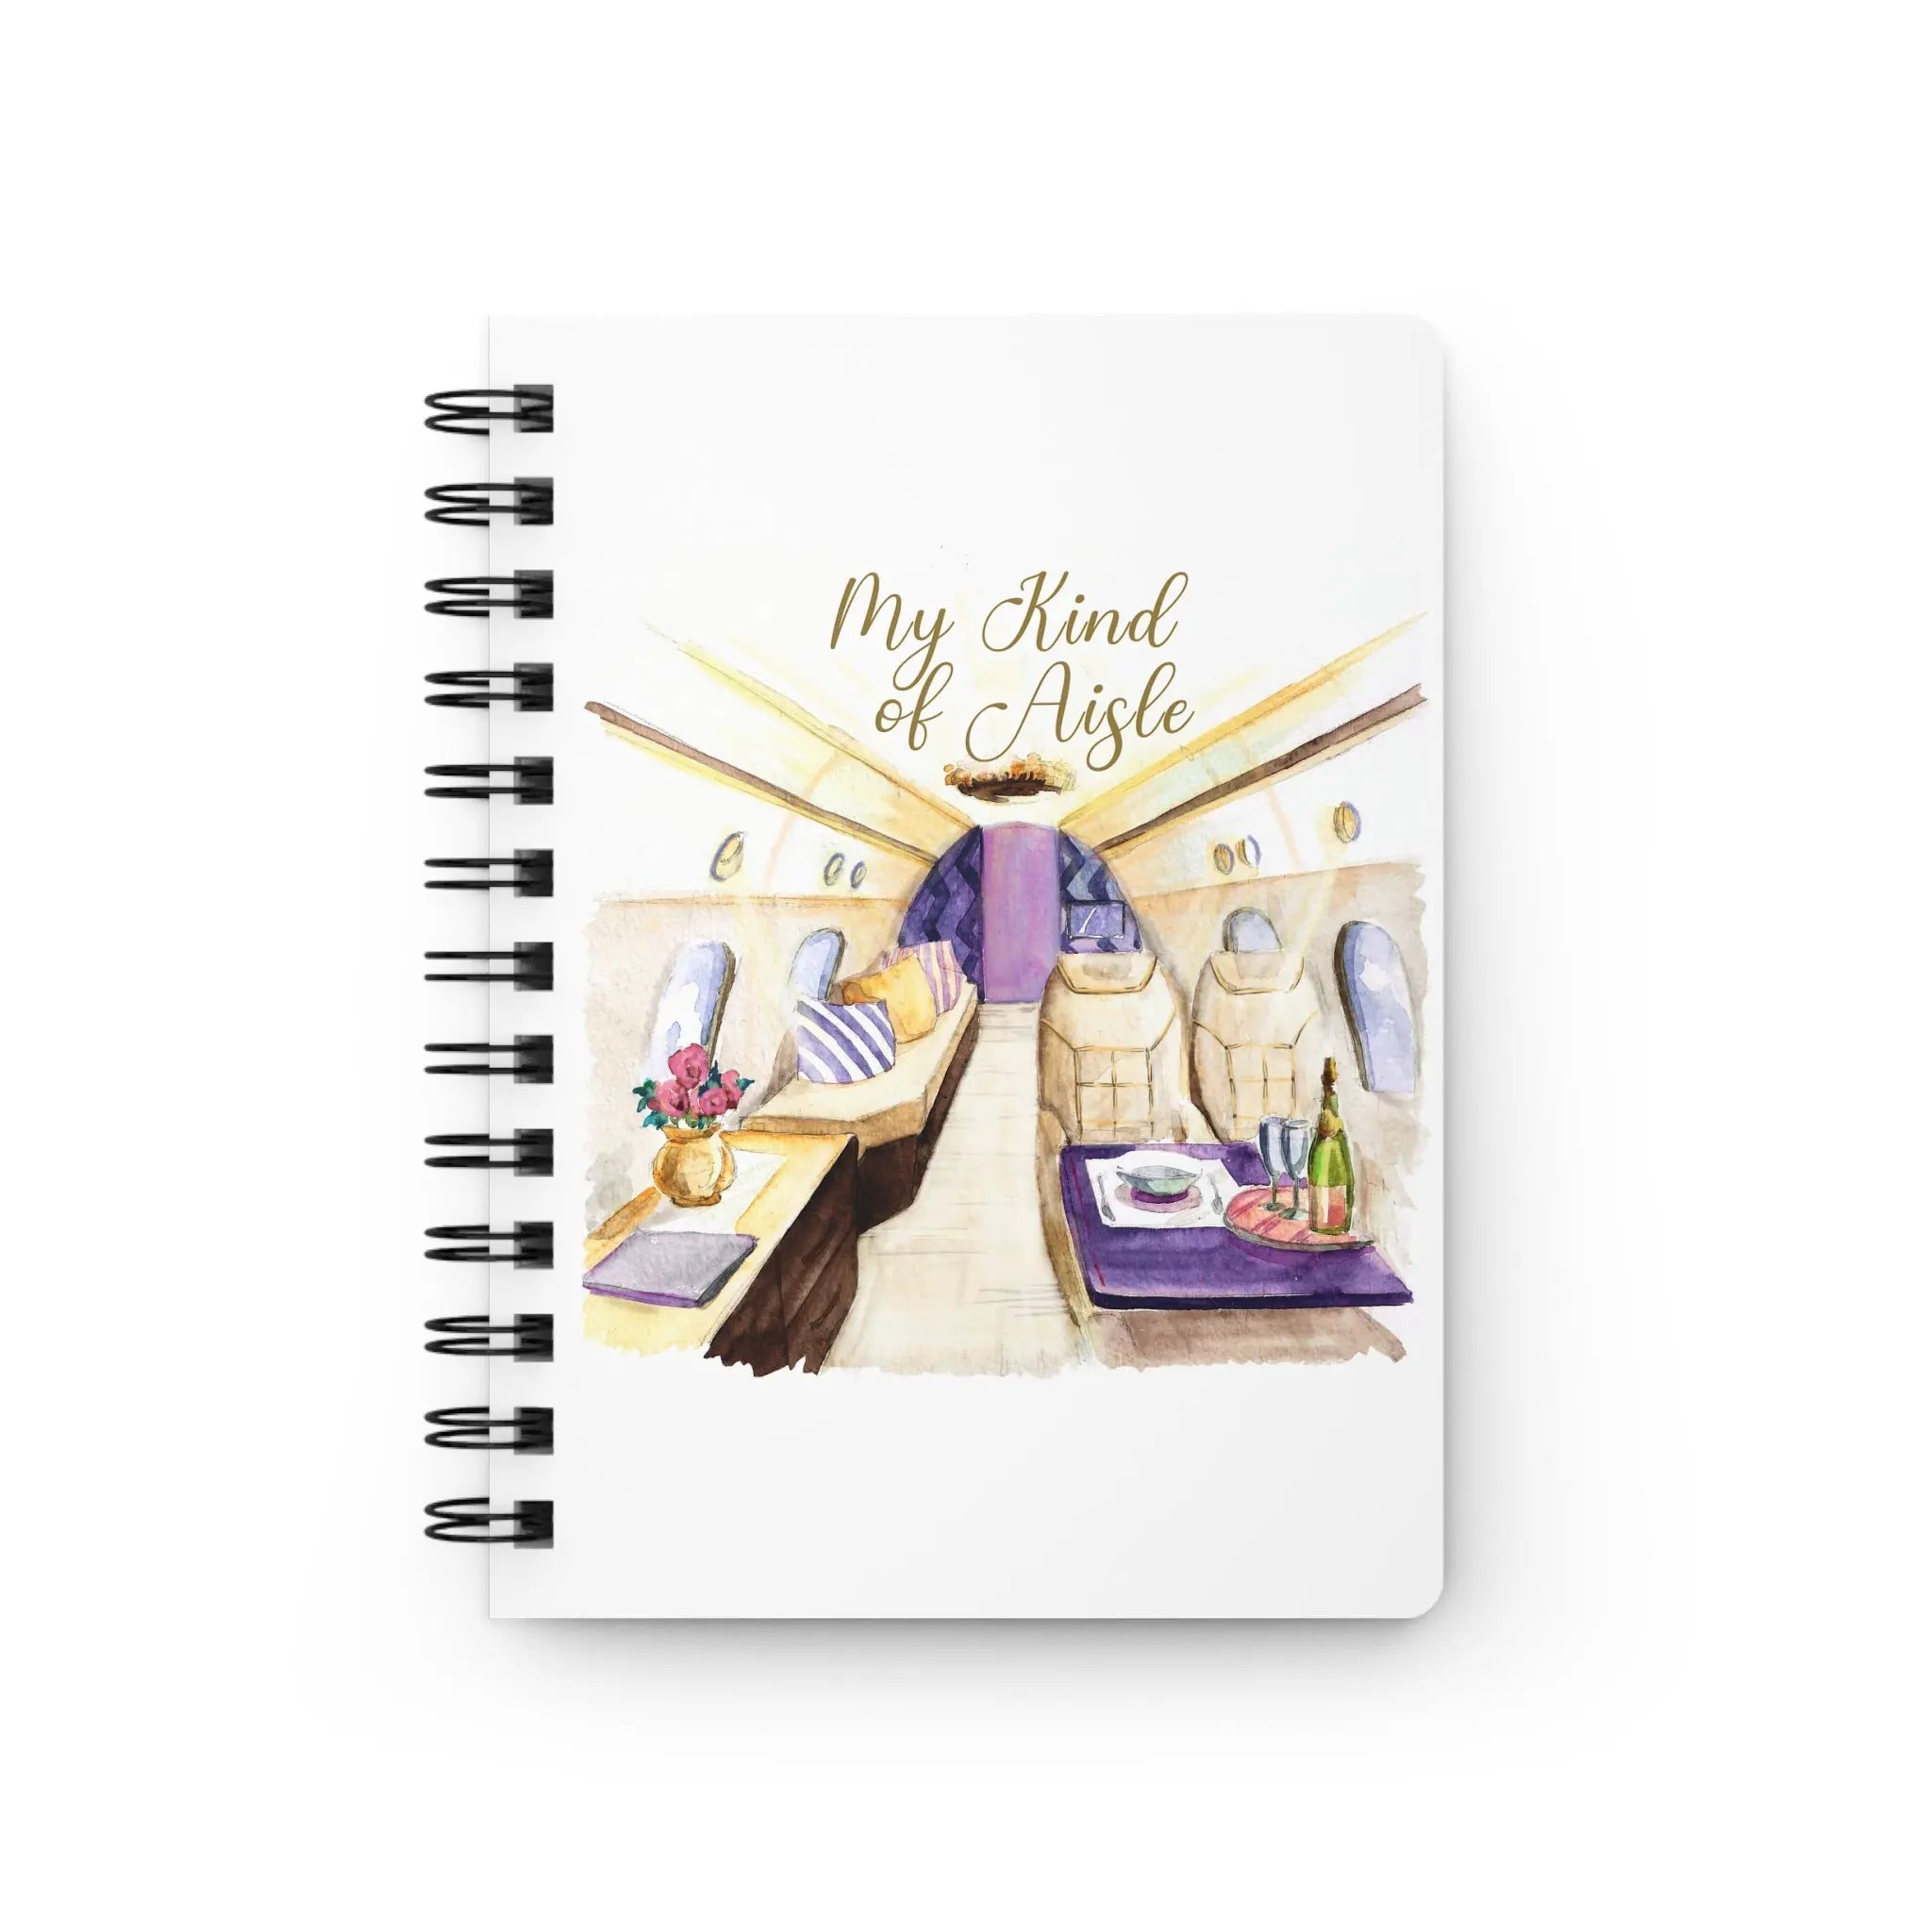 Empowerment Journal, Inspiring Women's Luxury Private Jet Airplane, 5x7 150 Page My Kind of Aisle